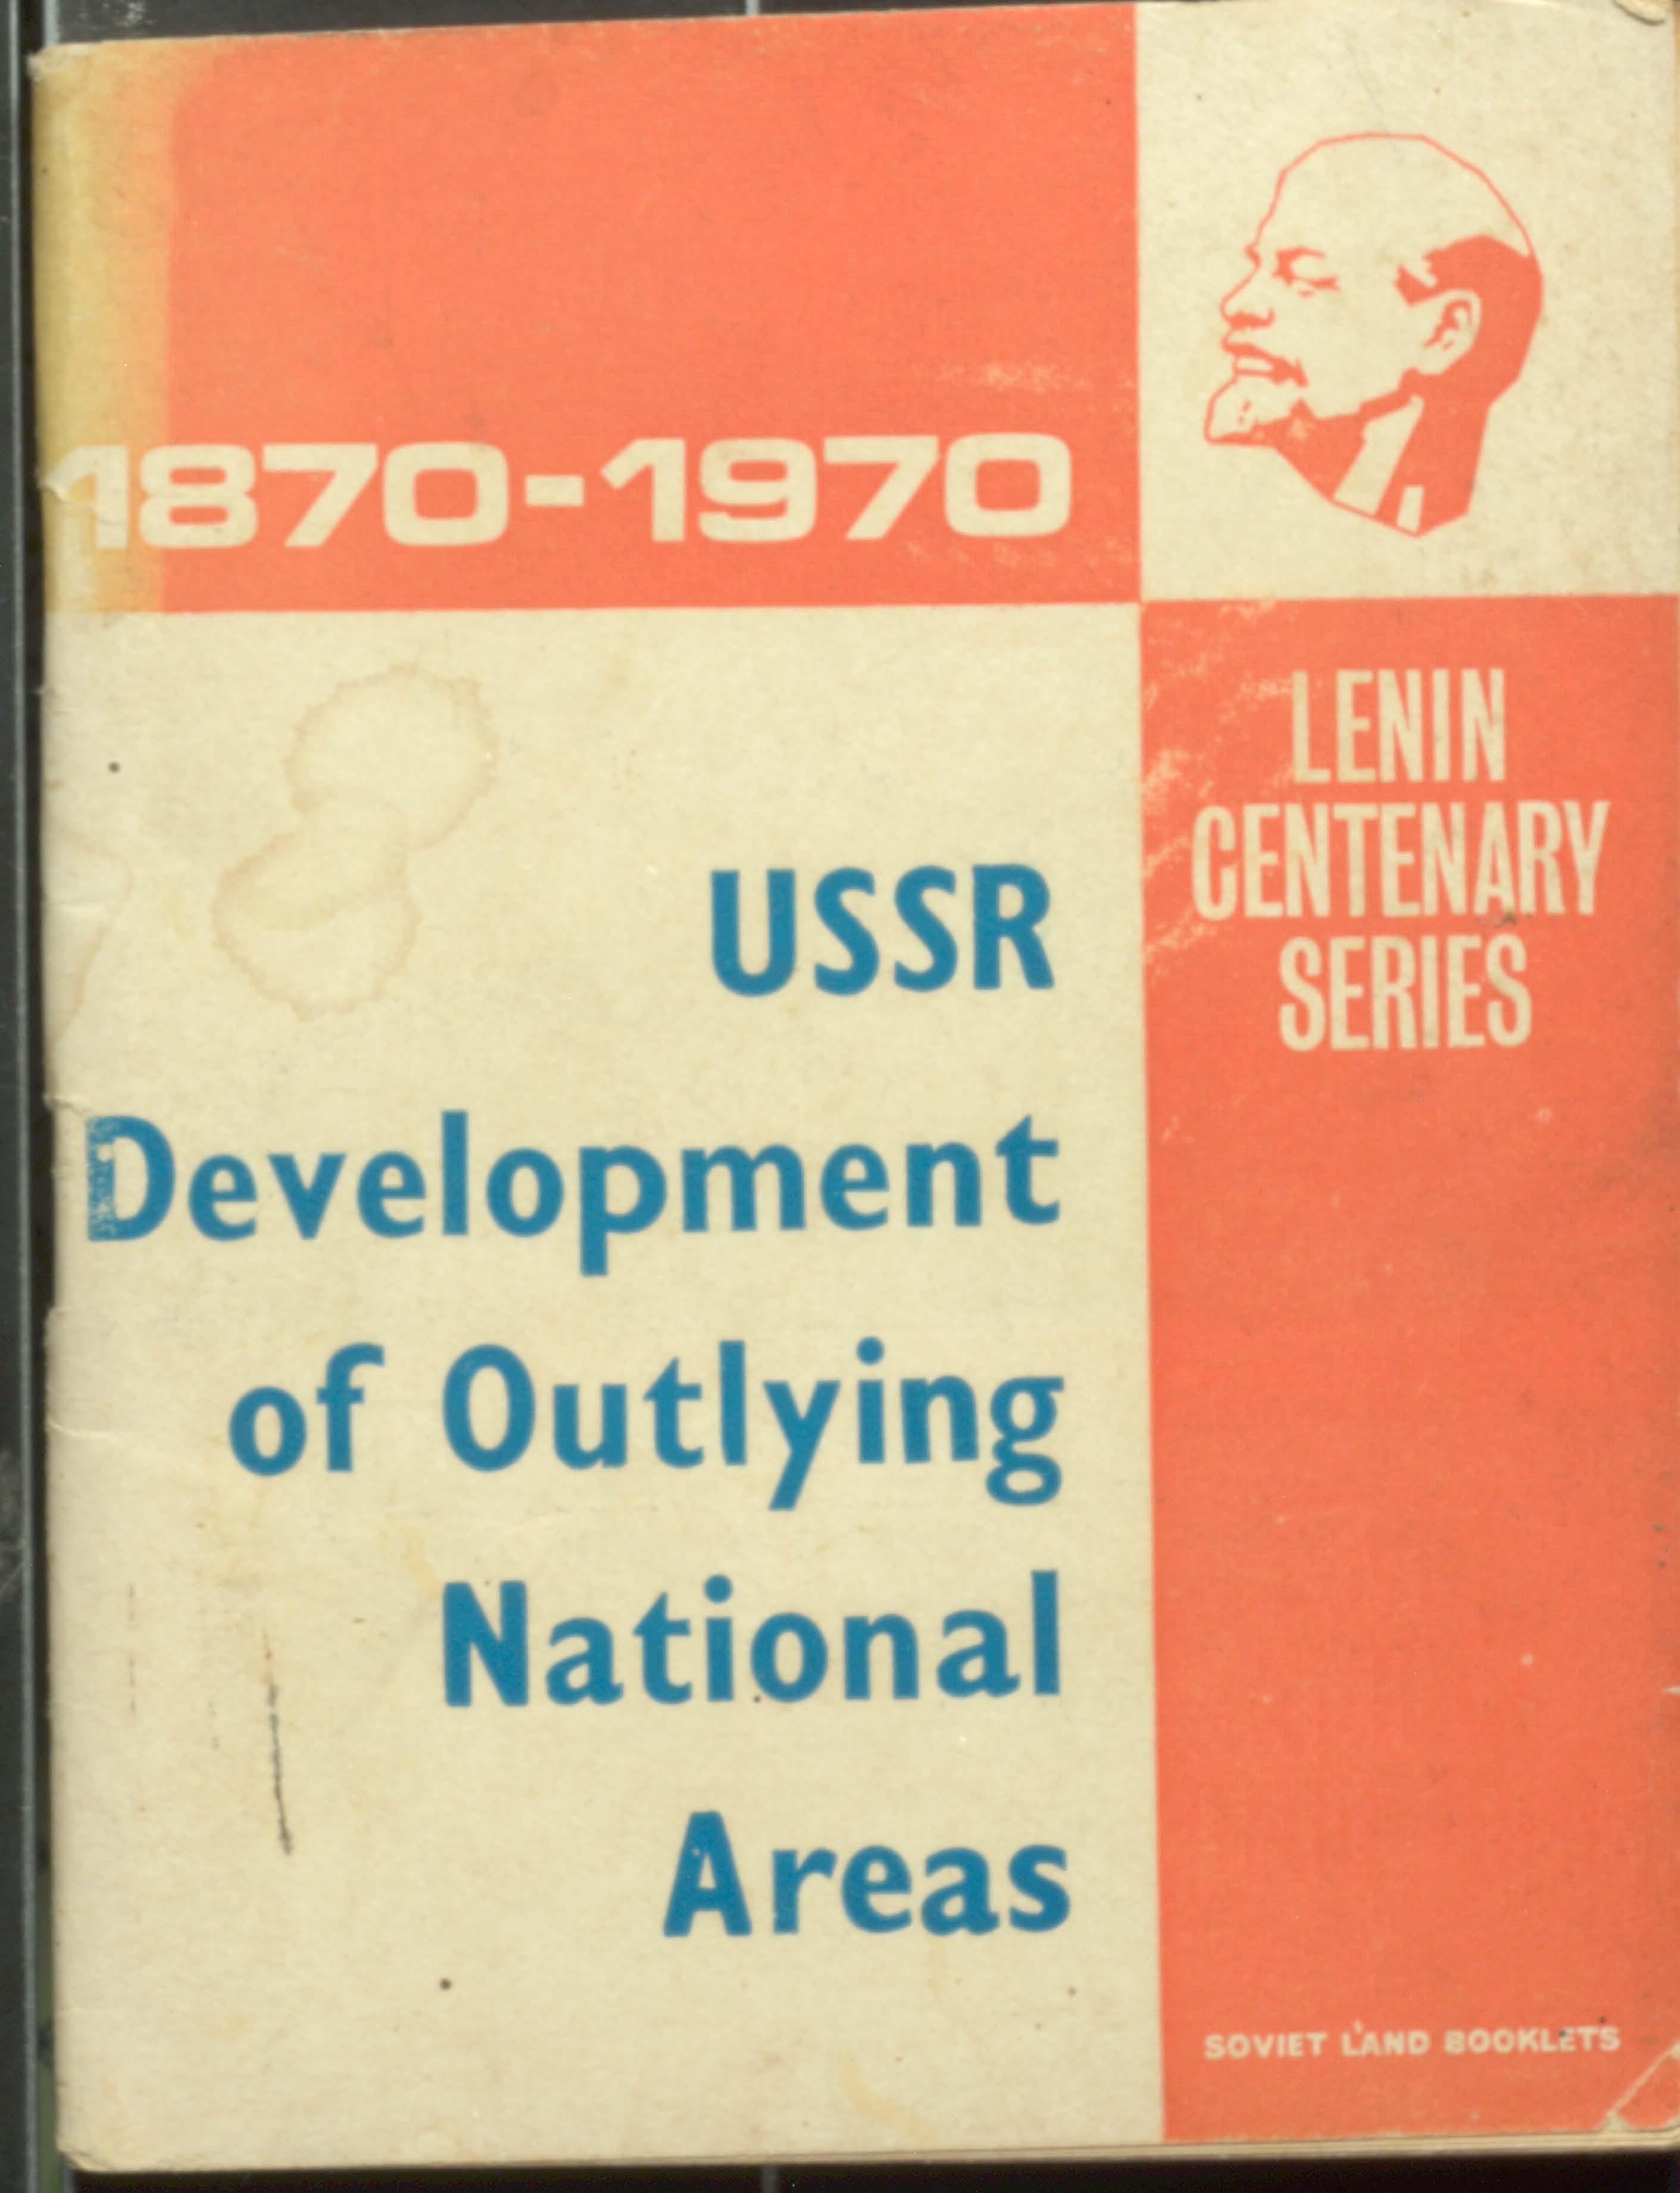 USSR development of outlying national areas 1870-1970